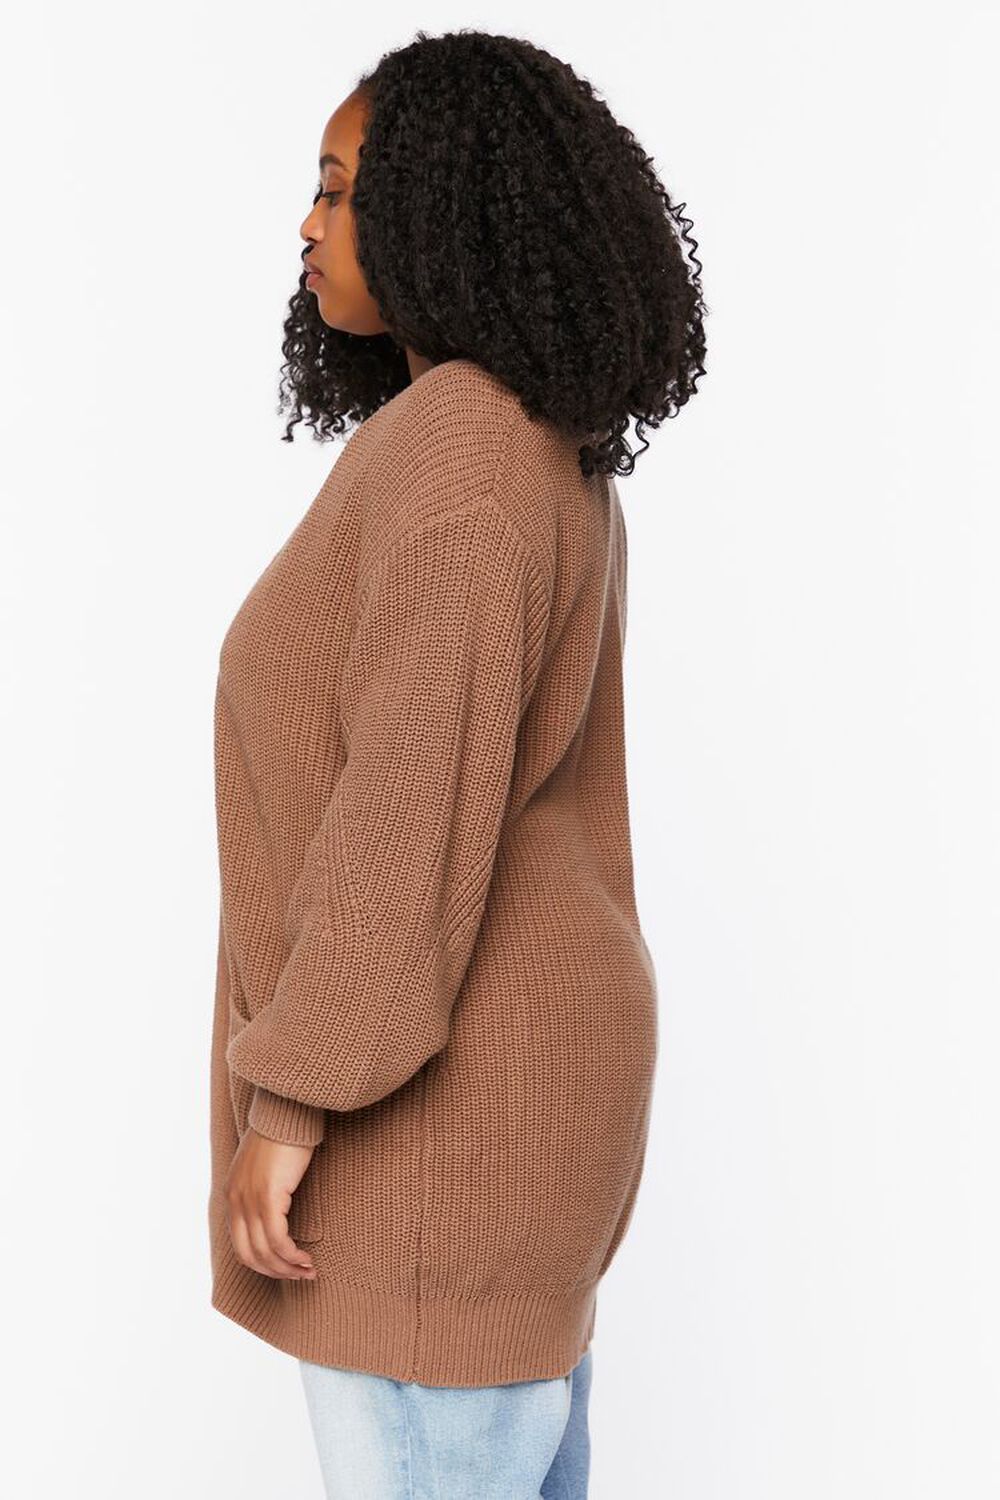 TAUPE Plus Size Open-Front Cardigan Sweater, image 2